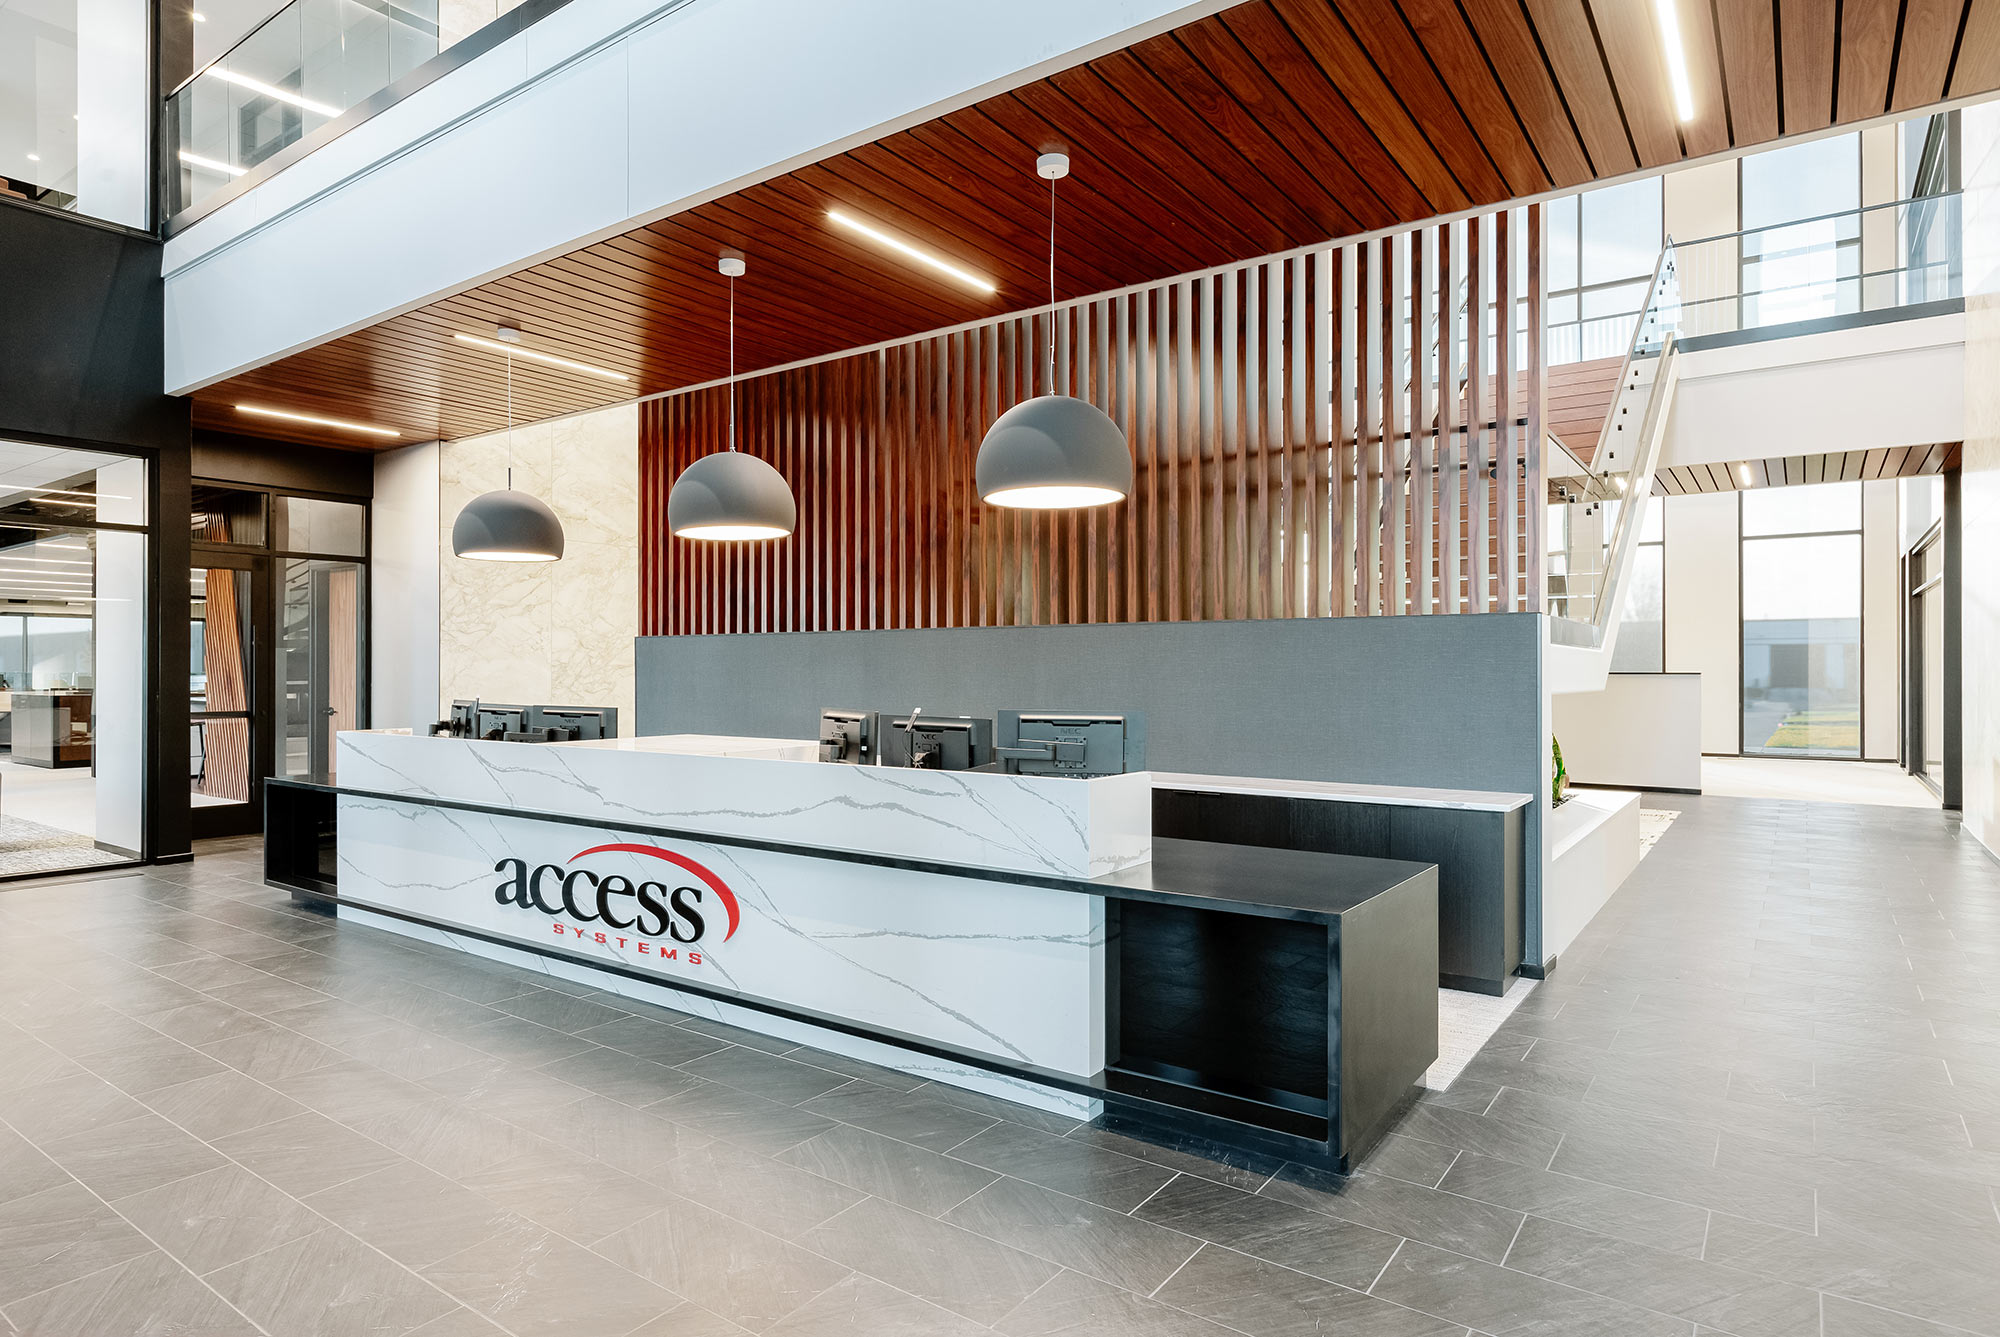 Image of CKF Access Systems 10 in The Fenix office building in Stockholm, where the Dekton façade preserves the original structure and the characteristic industrial heritage - Cosentino